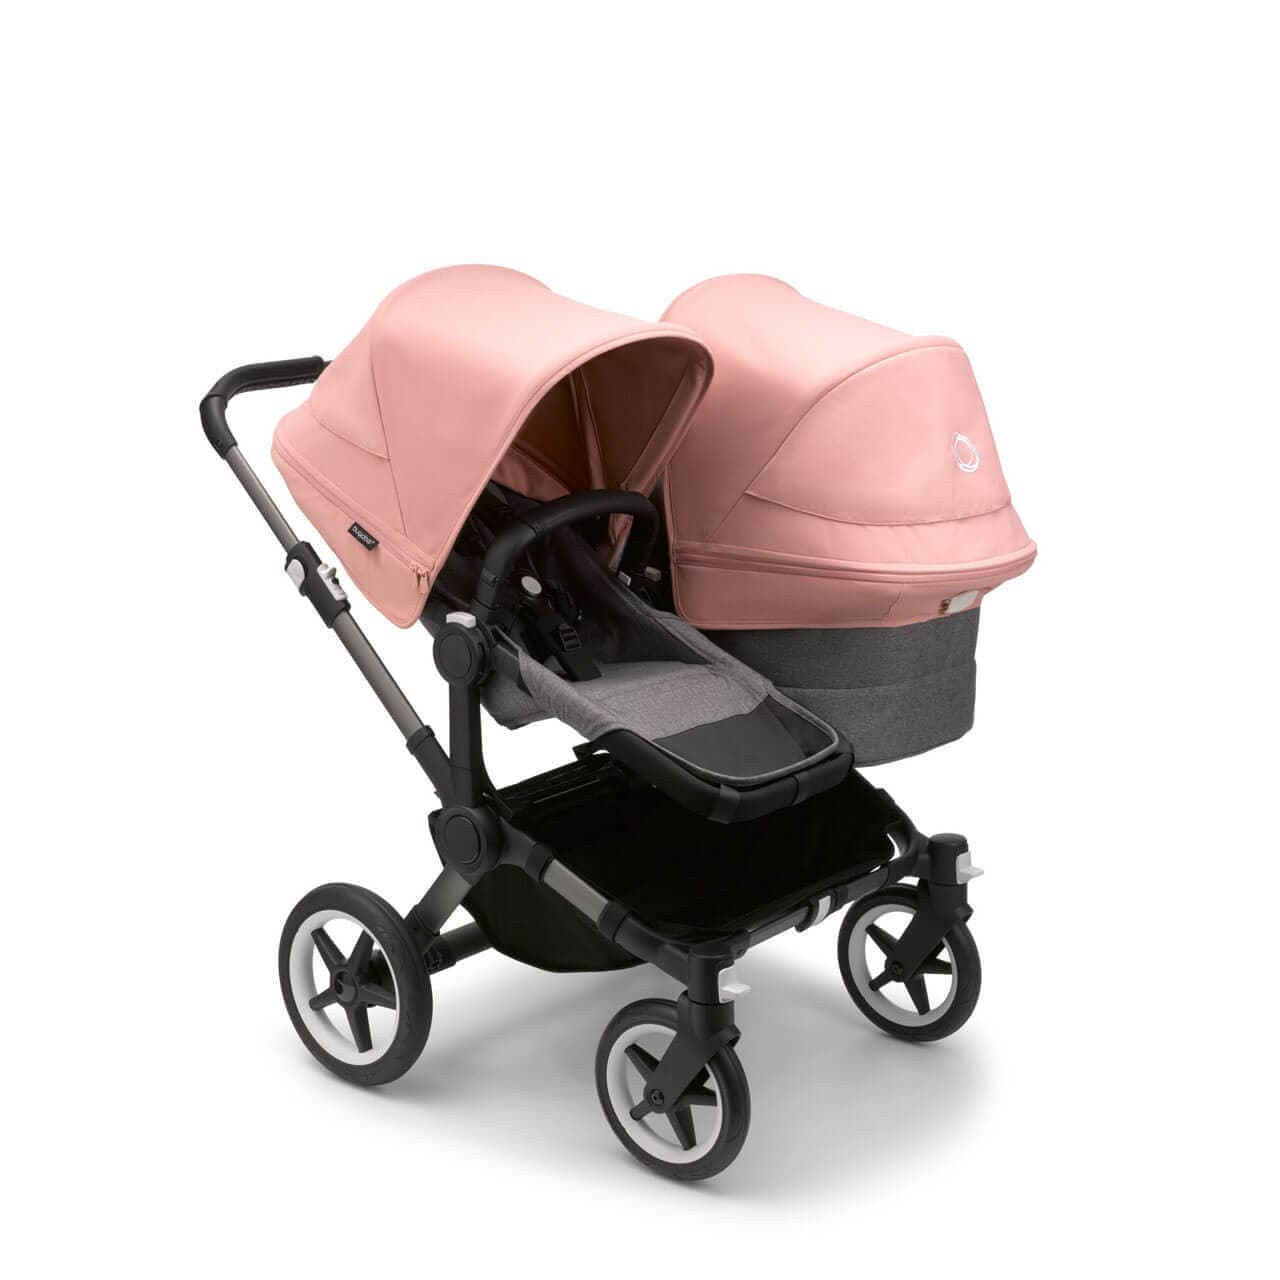 Bugaboo Donkey 5 Duo Pushchair on Graphite/Grey Chassis - Choose Your Colour - Morning Pink | For Your Little One